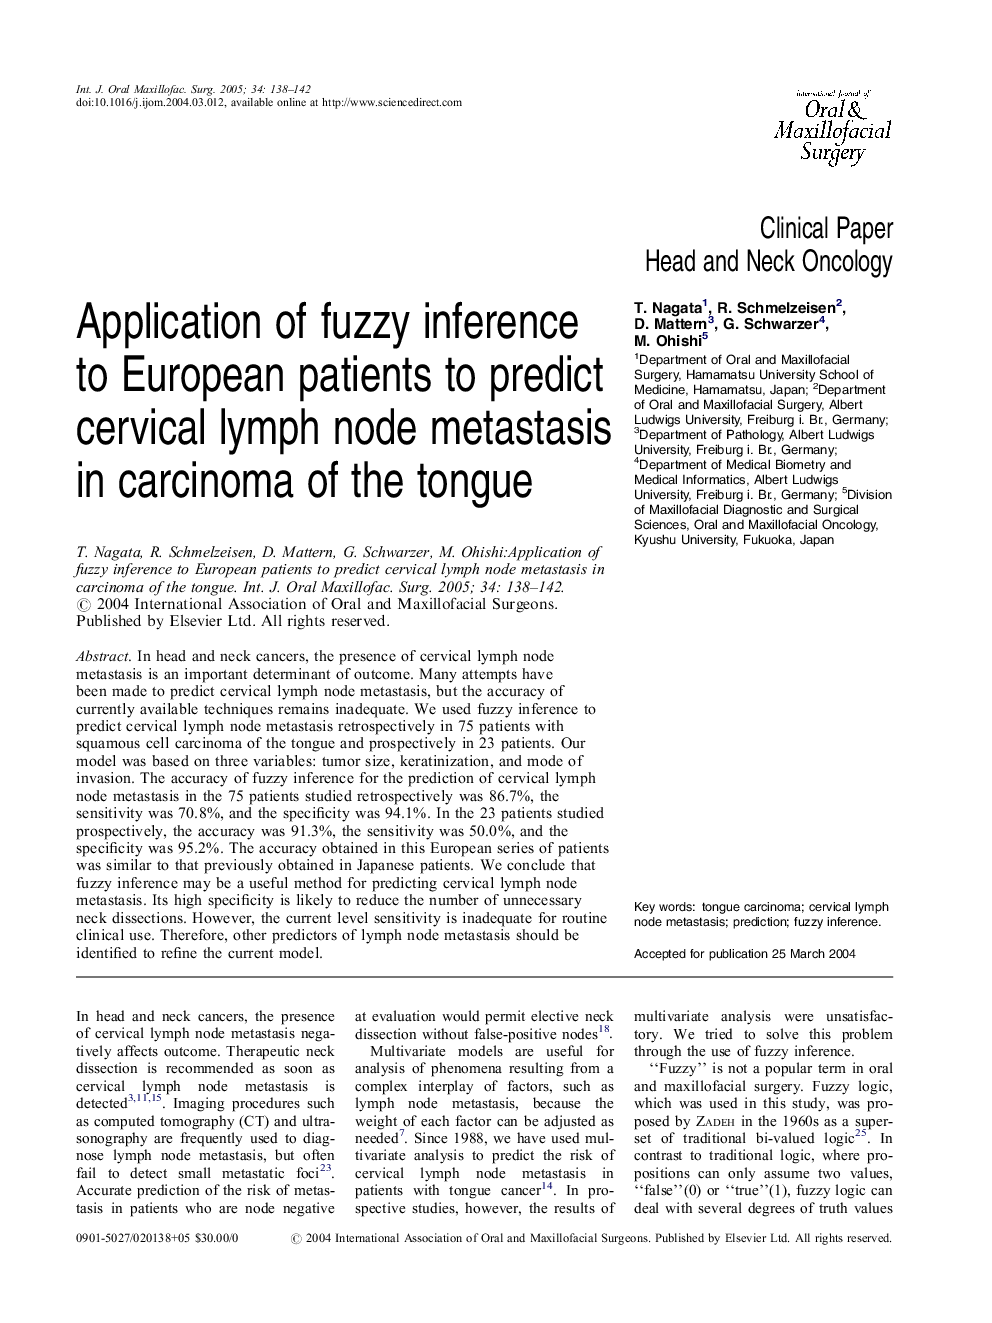 Application of fuzzy inference to European patients to predict cervical lymph node metastasis in carcinoma of the tongue